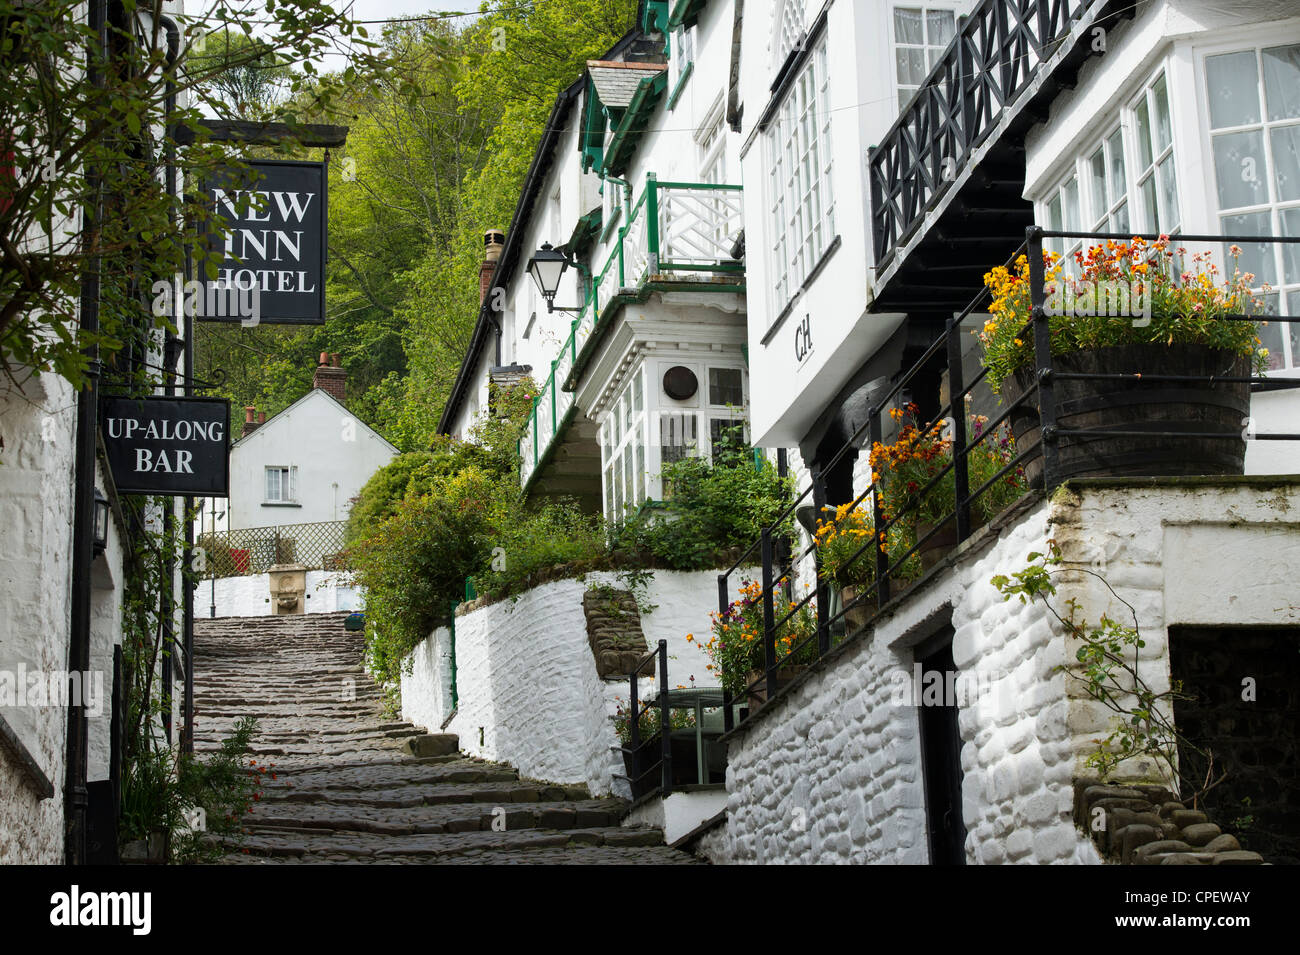 Clovelly. Historical privately owned traditional Devon Village. England Stock Photo